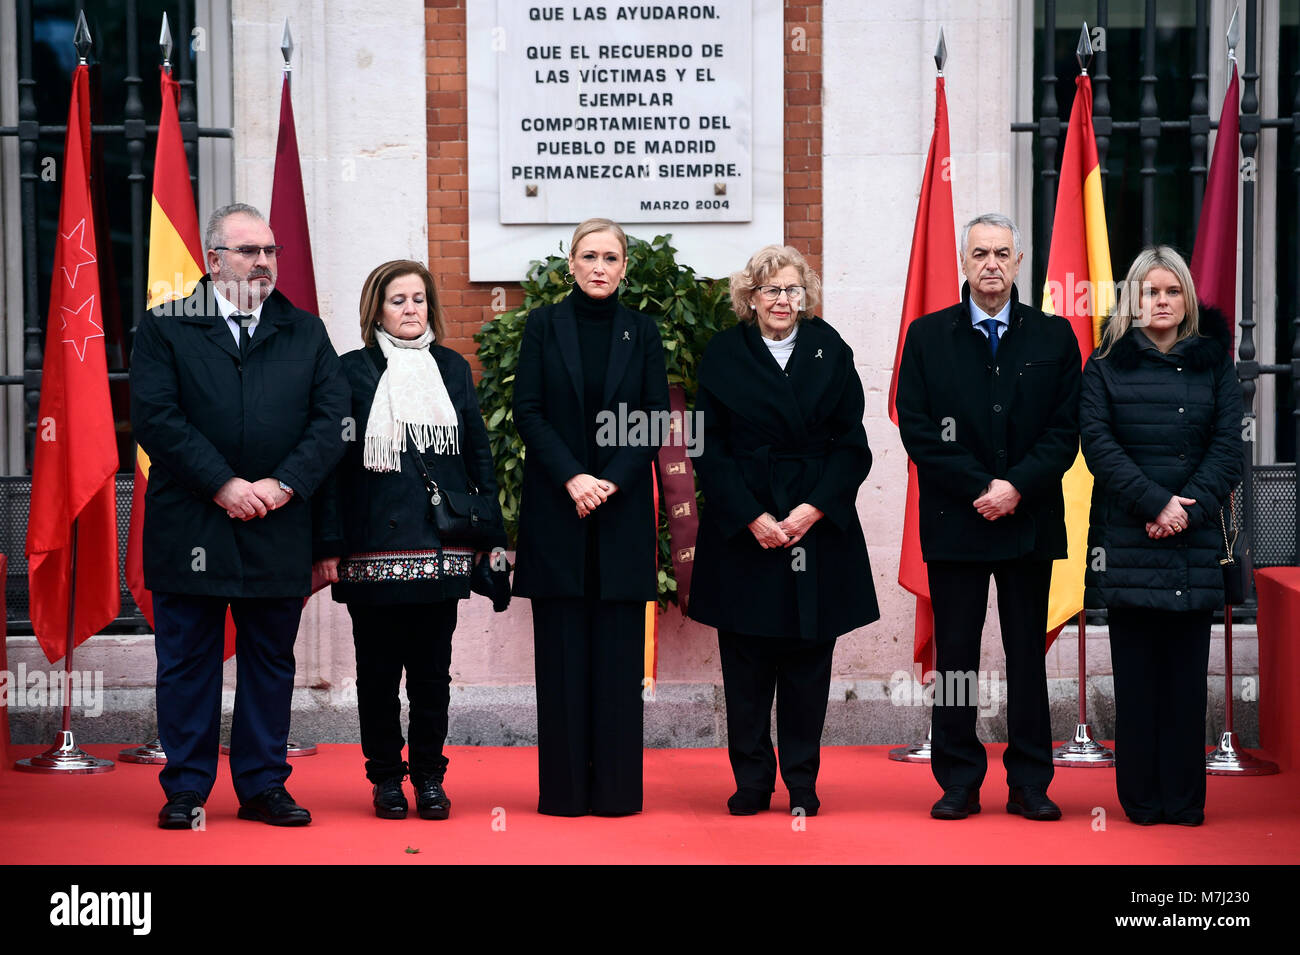 Madrid, Spain. 11th March, 2018. President of the Community of Madrid, Cristina Cifuentes and the Mayor of Madrid, Manuela Carmena during a tribute in memory of the victims of the attack of 11-M 2004, at the Headquarters of the Community of Madrid on Sunday 11 March 2018. Credit: Gtres Información más Comuniación on line, S.L./Alamy Live News Stock Photo